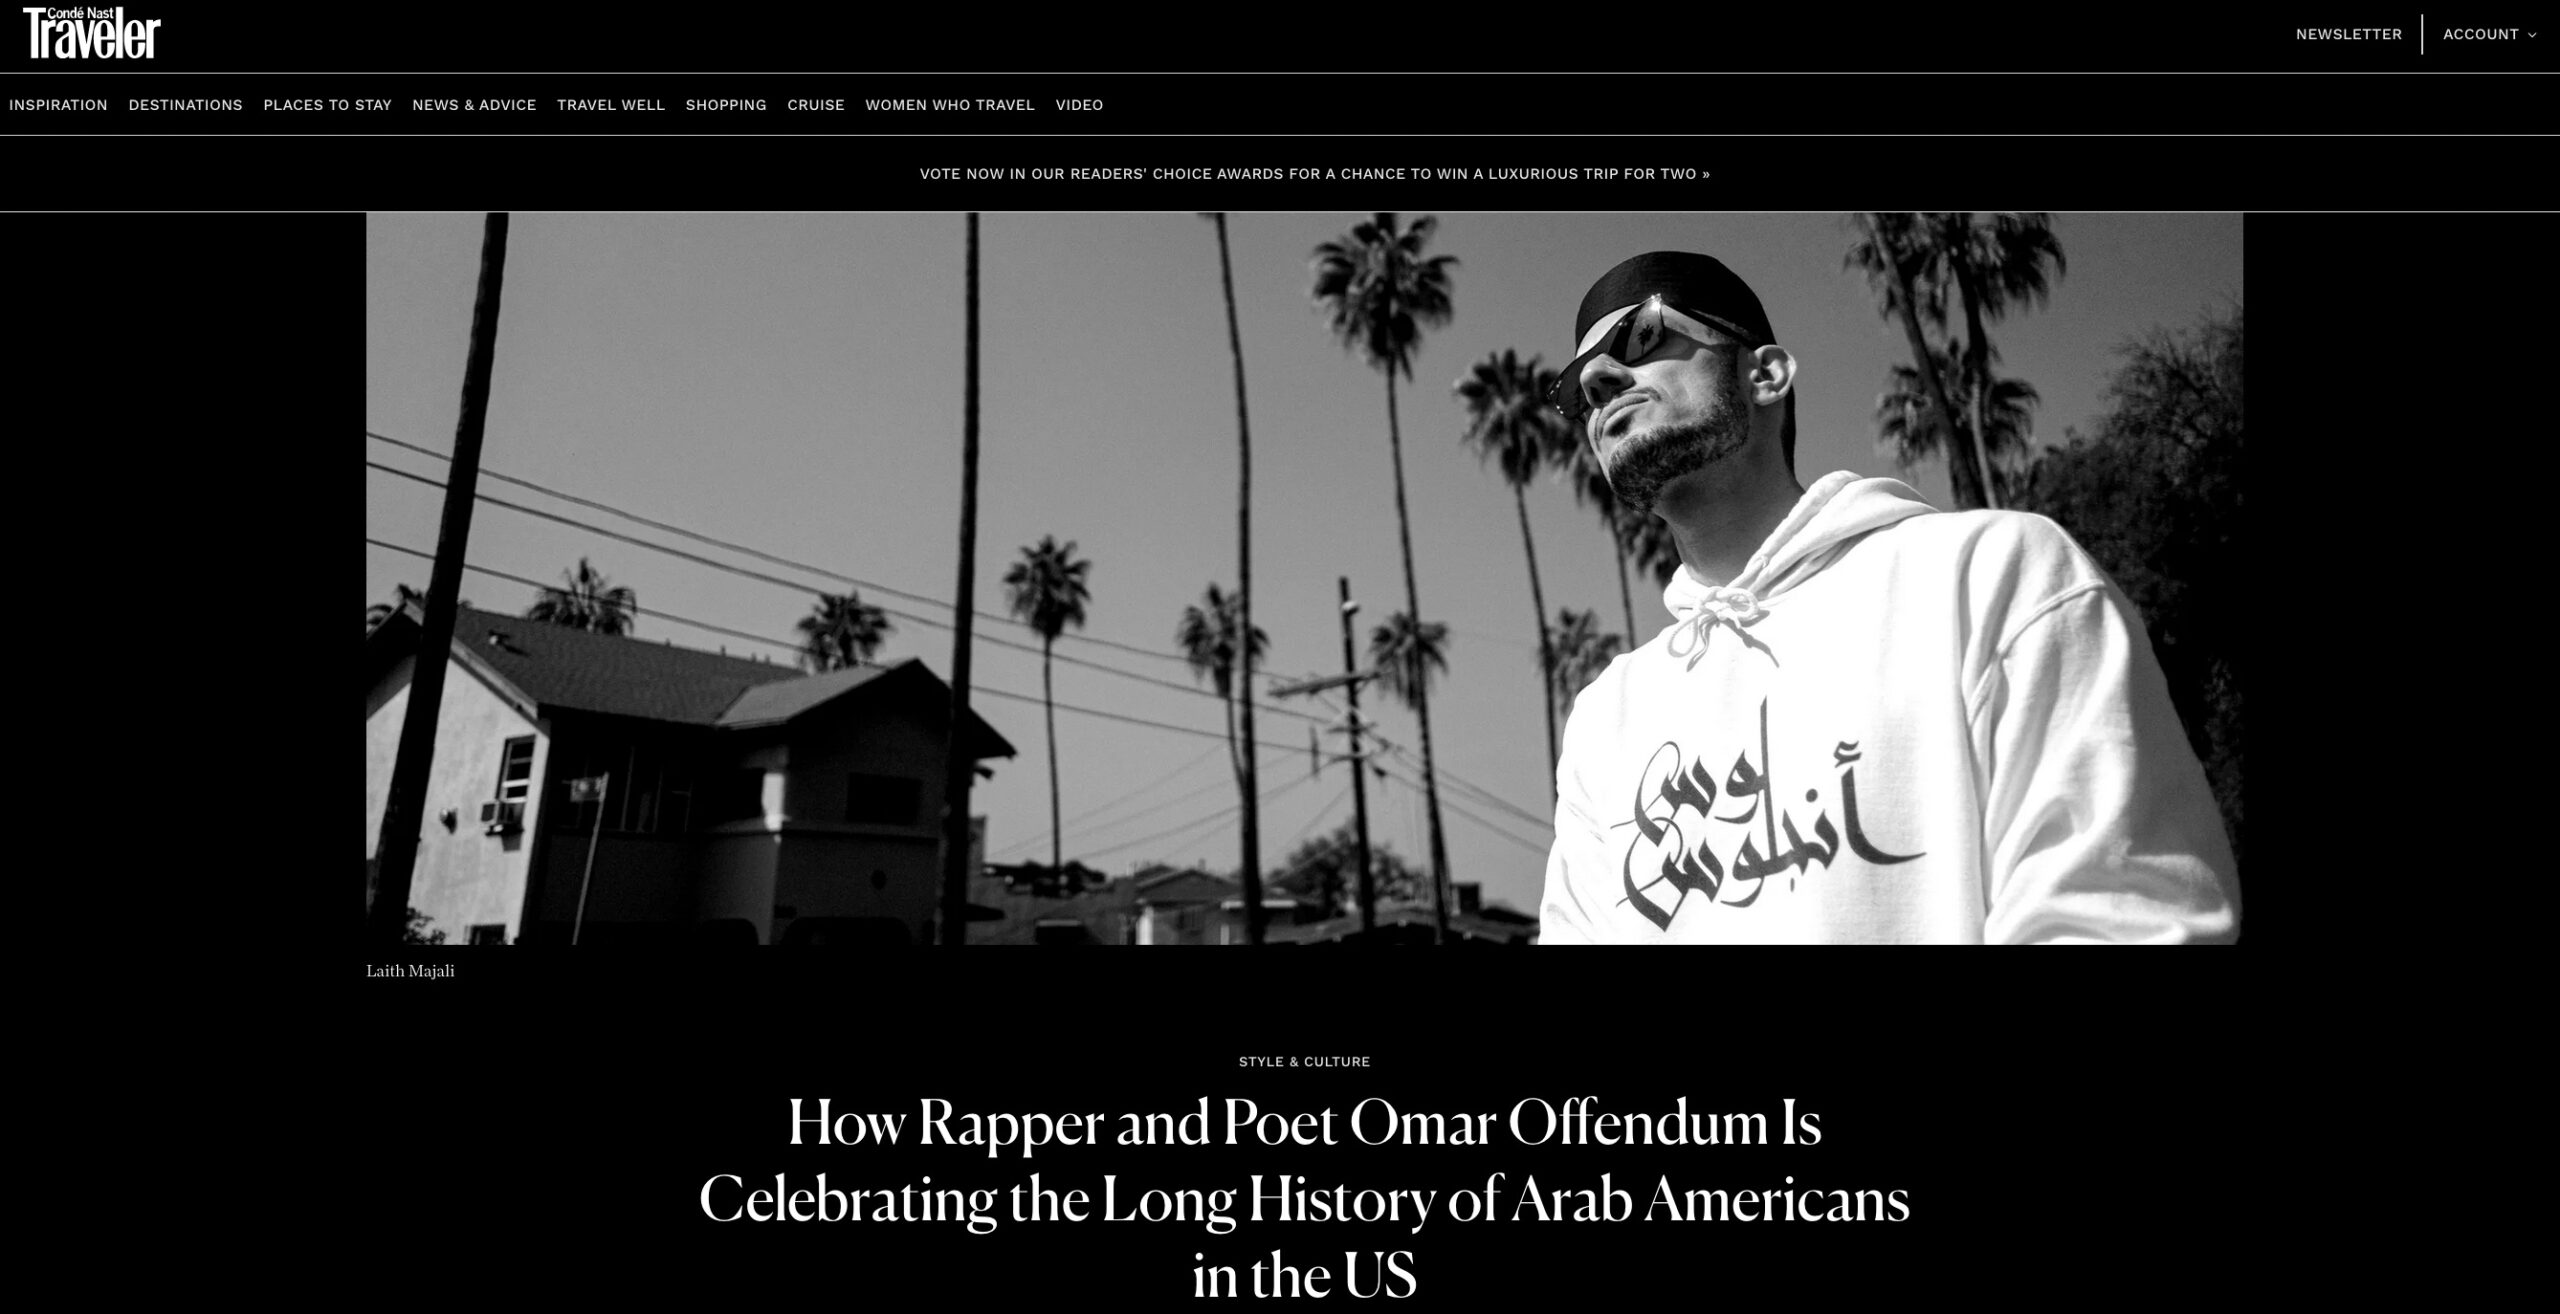 Condé Nast Traveler: How Rapper and Poet Omar Offendum Is Celebrating the Long History of Arab Americans in the US